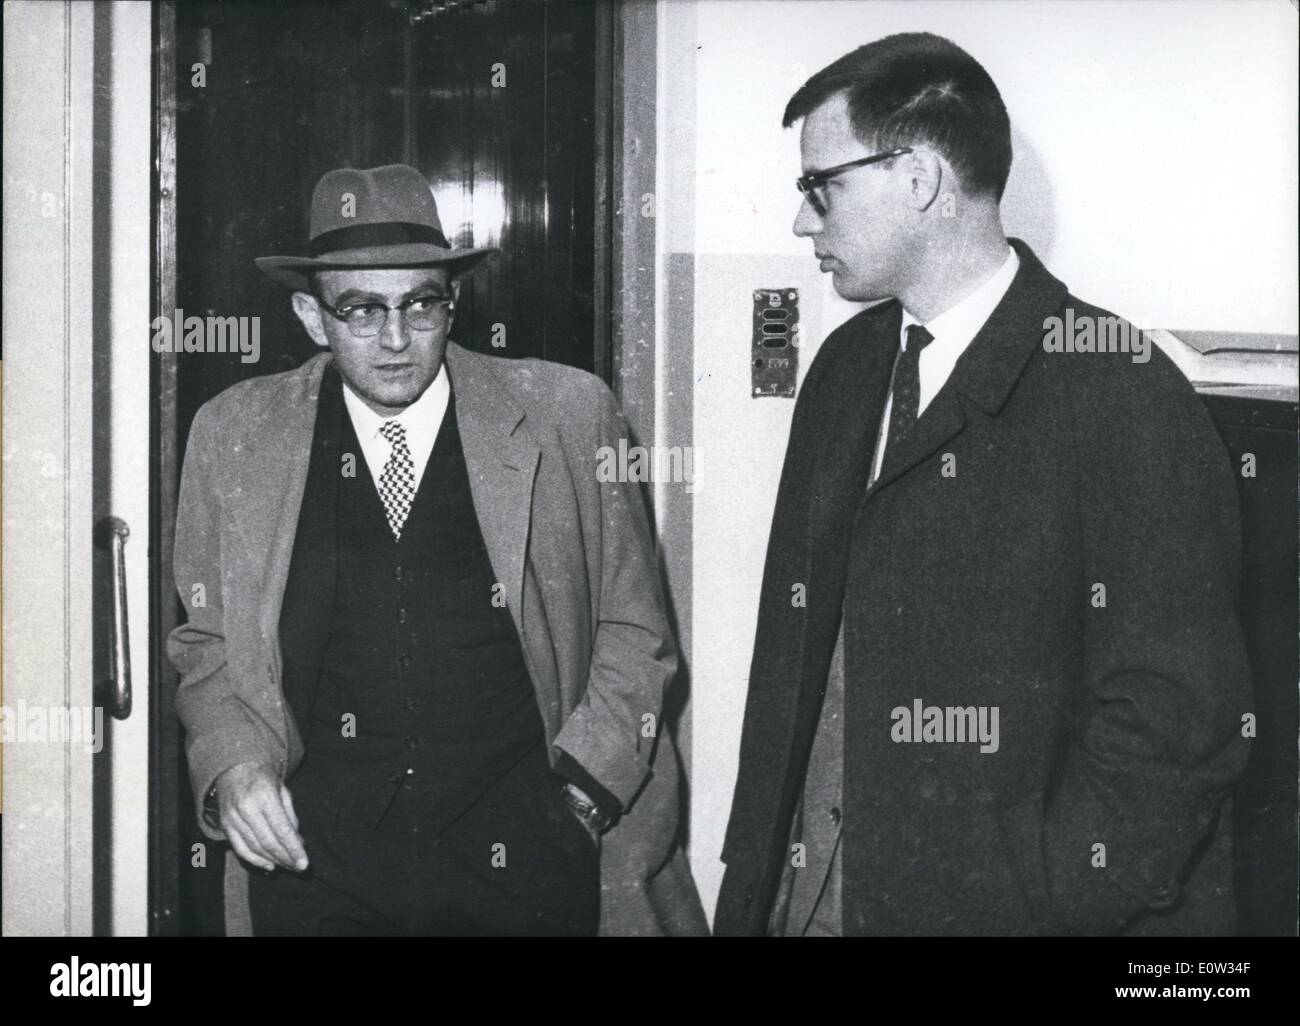 Mar. 03, 1961 - Eichmann Trial in Jerusalem April 11th, 1961: On April 11th, 1961, in Jerusalem the trial against Adolf Eichmann will be opened. As former SS-man, Eichmann was ''responsible for the solving of the Jews problem''. Photo Shows The attorney general of Israel, Gideon Hausner (Gideon Hausner) left with the assistant of Eichmann's solicitor Dr. Servatius, Dieter Wechsbruch. Stock Photo